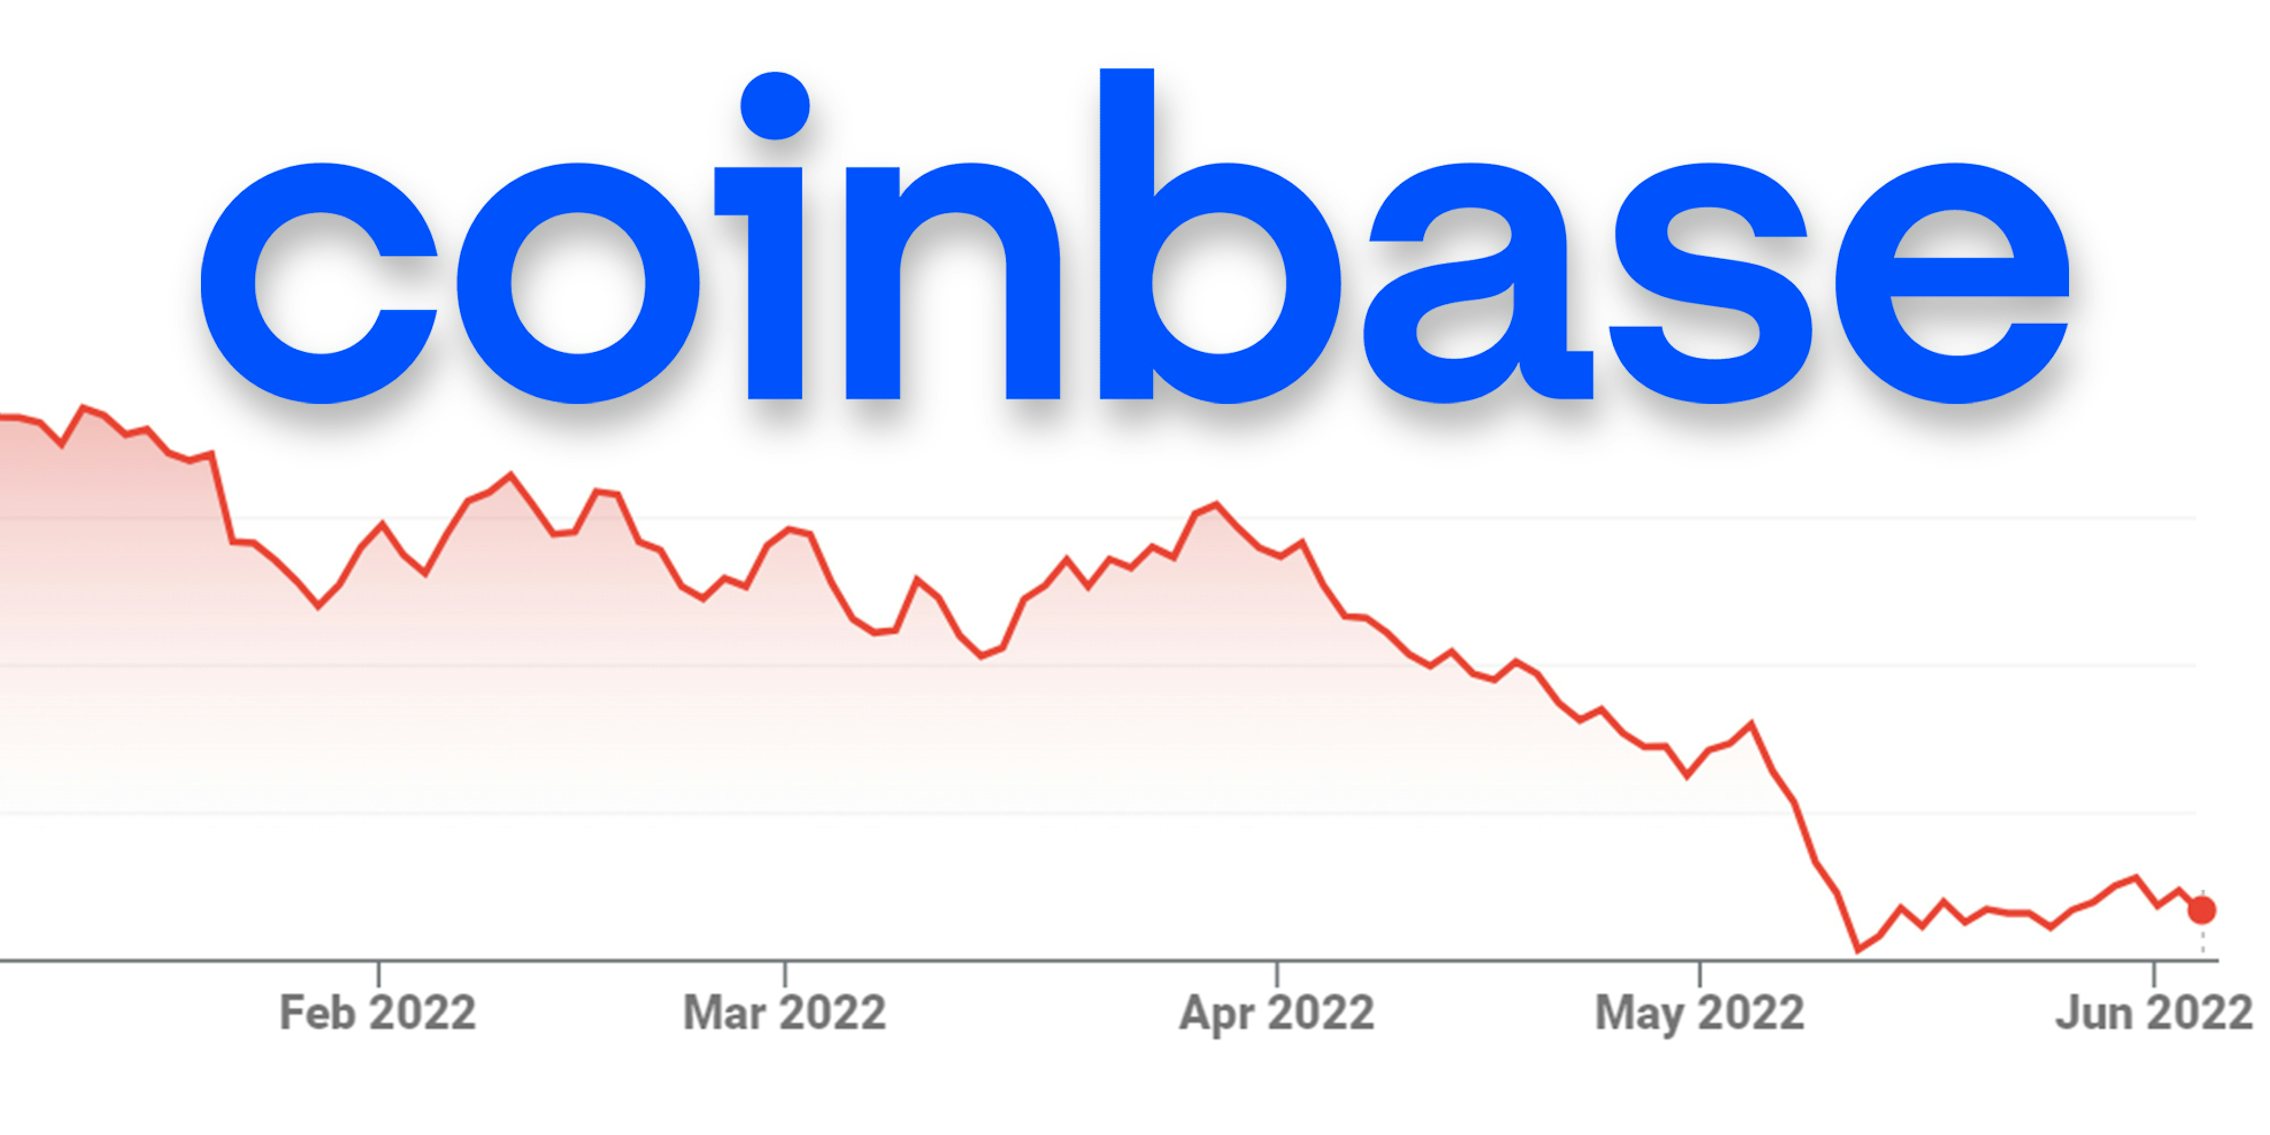 Coinbase stock falling on chart Coinbase logo above in blue